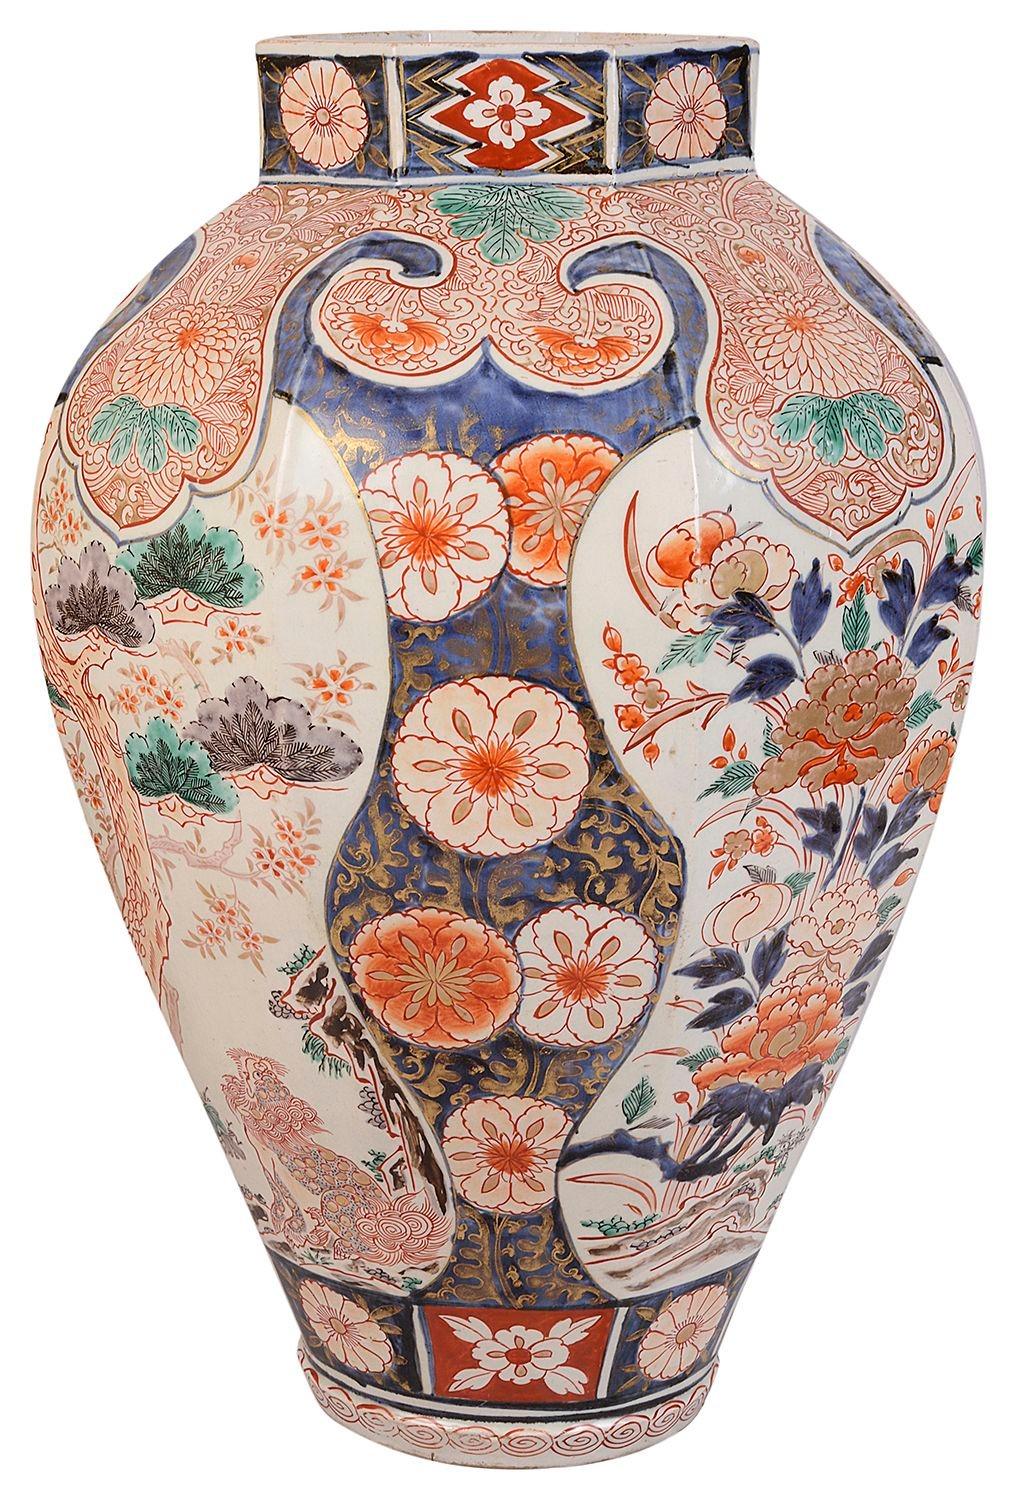 18th Century Japanese Imari vase / lamp, having wonderful bold colouring to the motif boarders and inset panels depicting exotic birds and flowers, circa 1780.
 
Batch 72